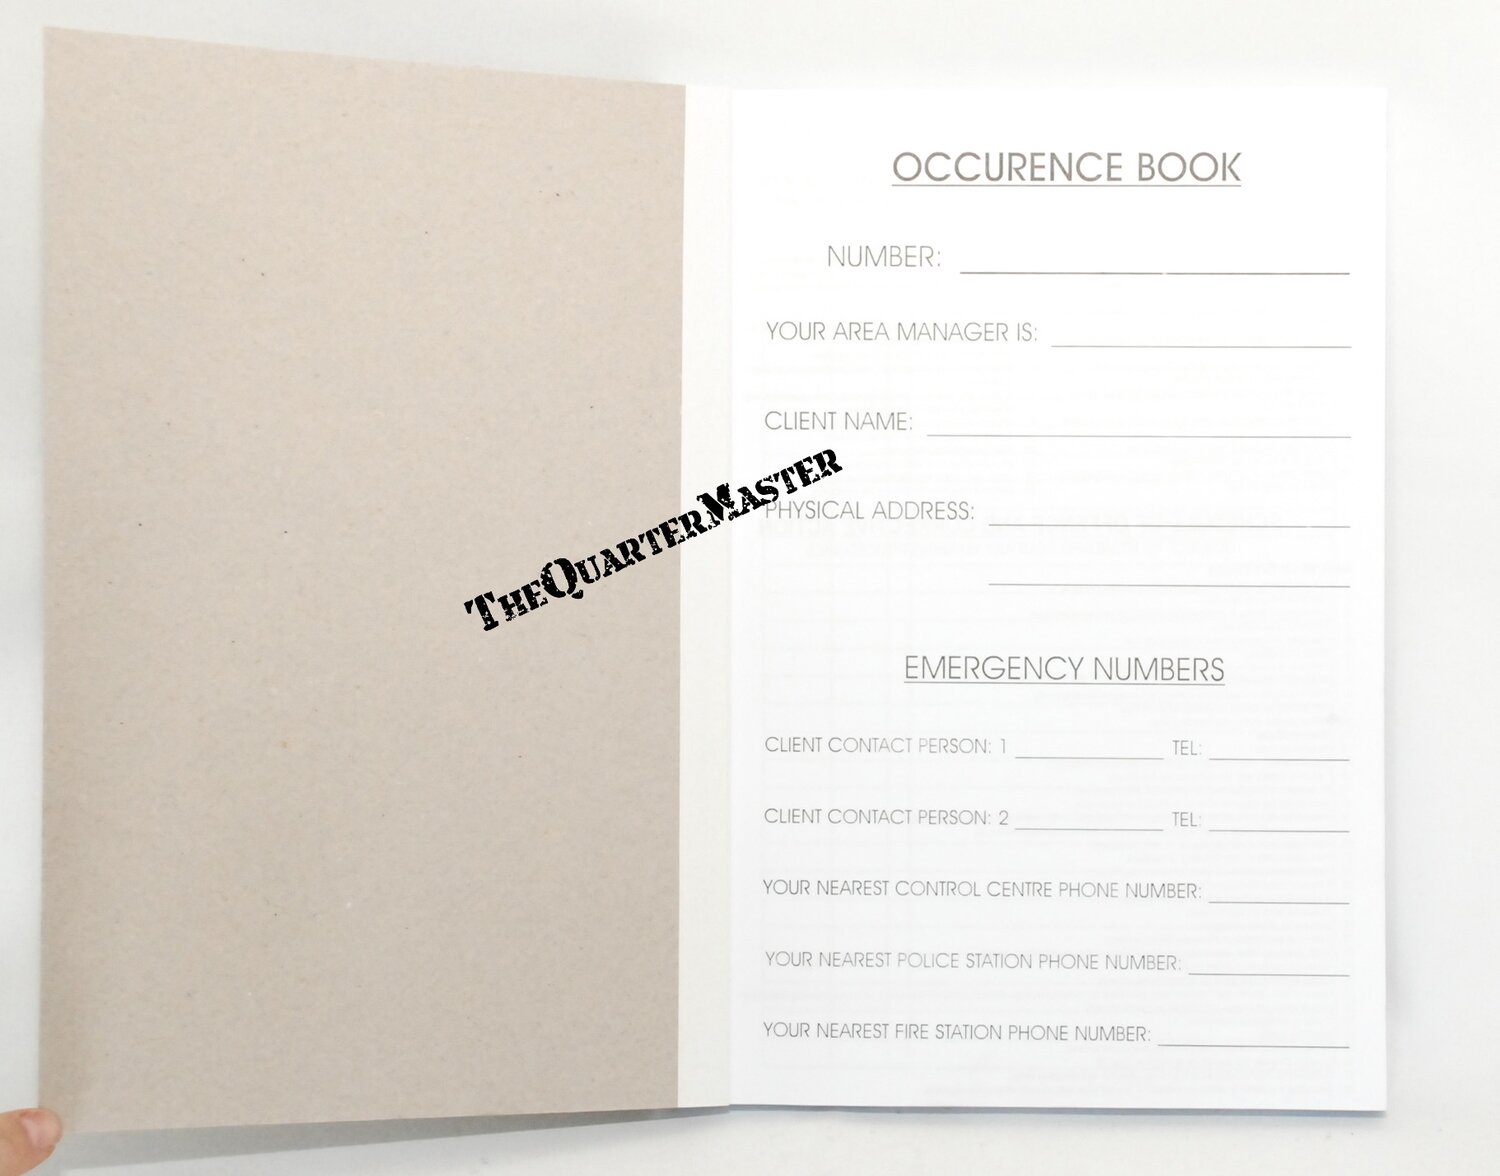 Occurrence Book